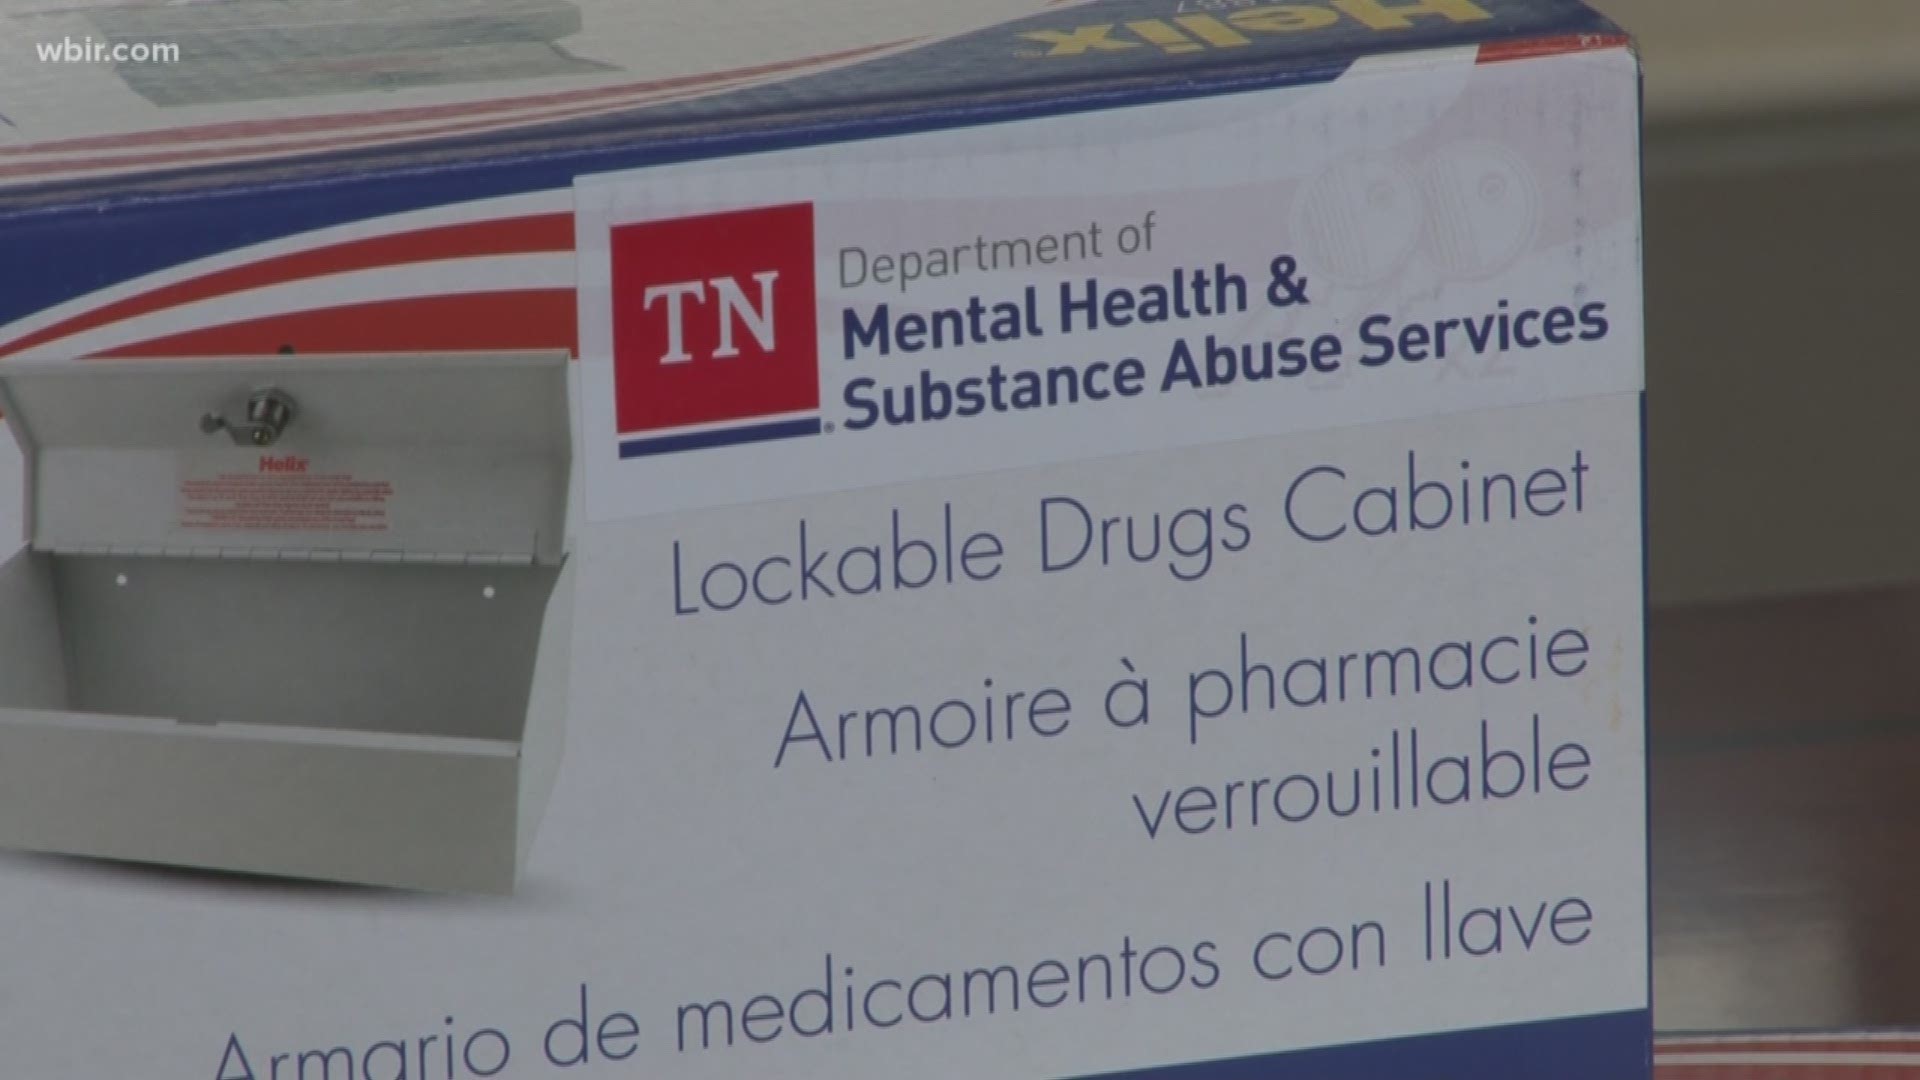 Saturday, April 27, is National Prescription Drug Take-Back Day. The biannual event will be held from 10 a.m. to 2 p.m., at thousands of collection sites around the country, including several in East Tennessee.